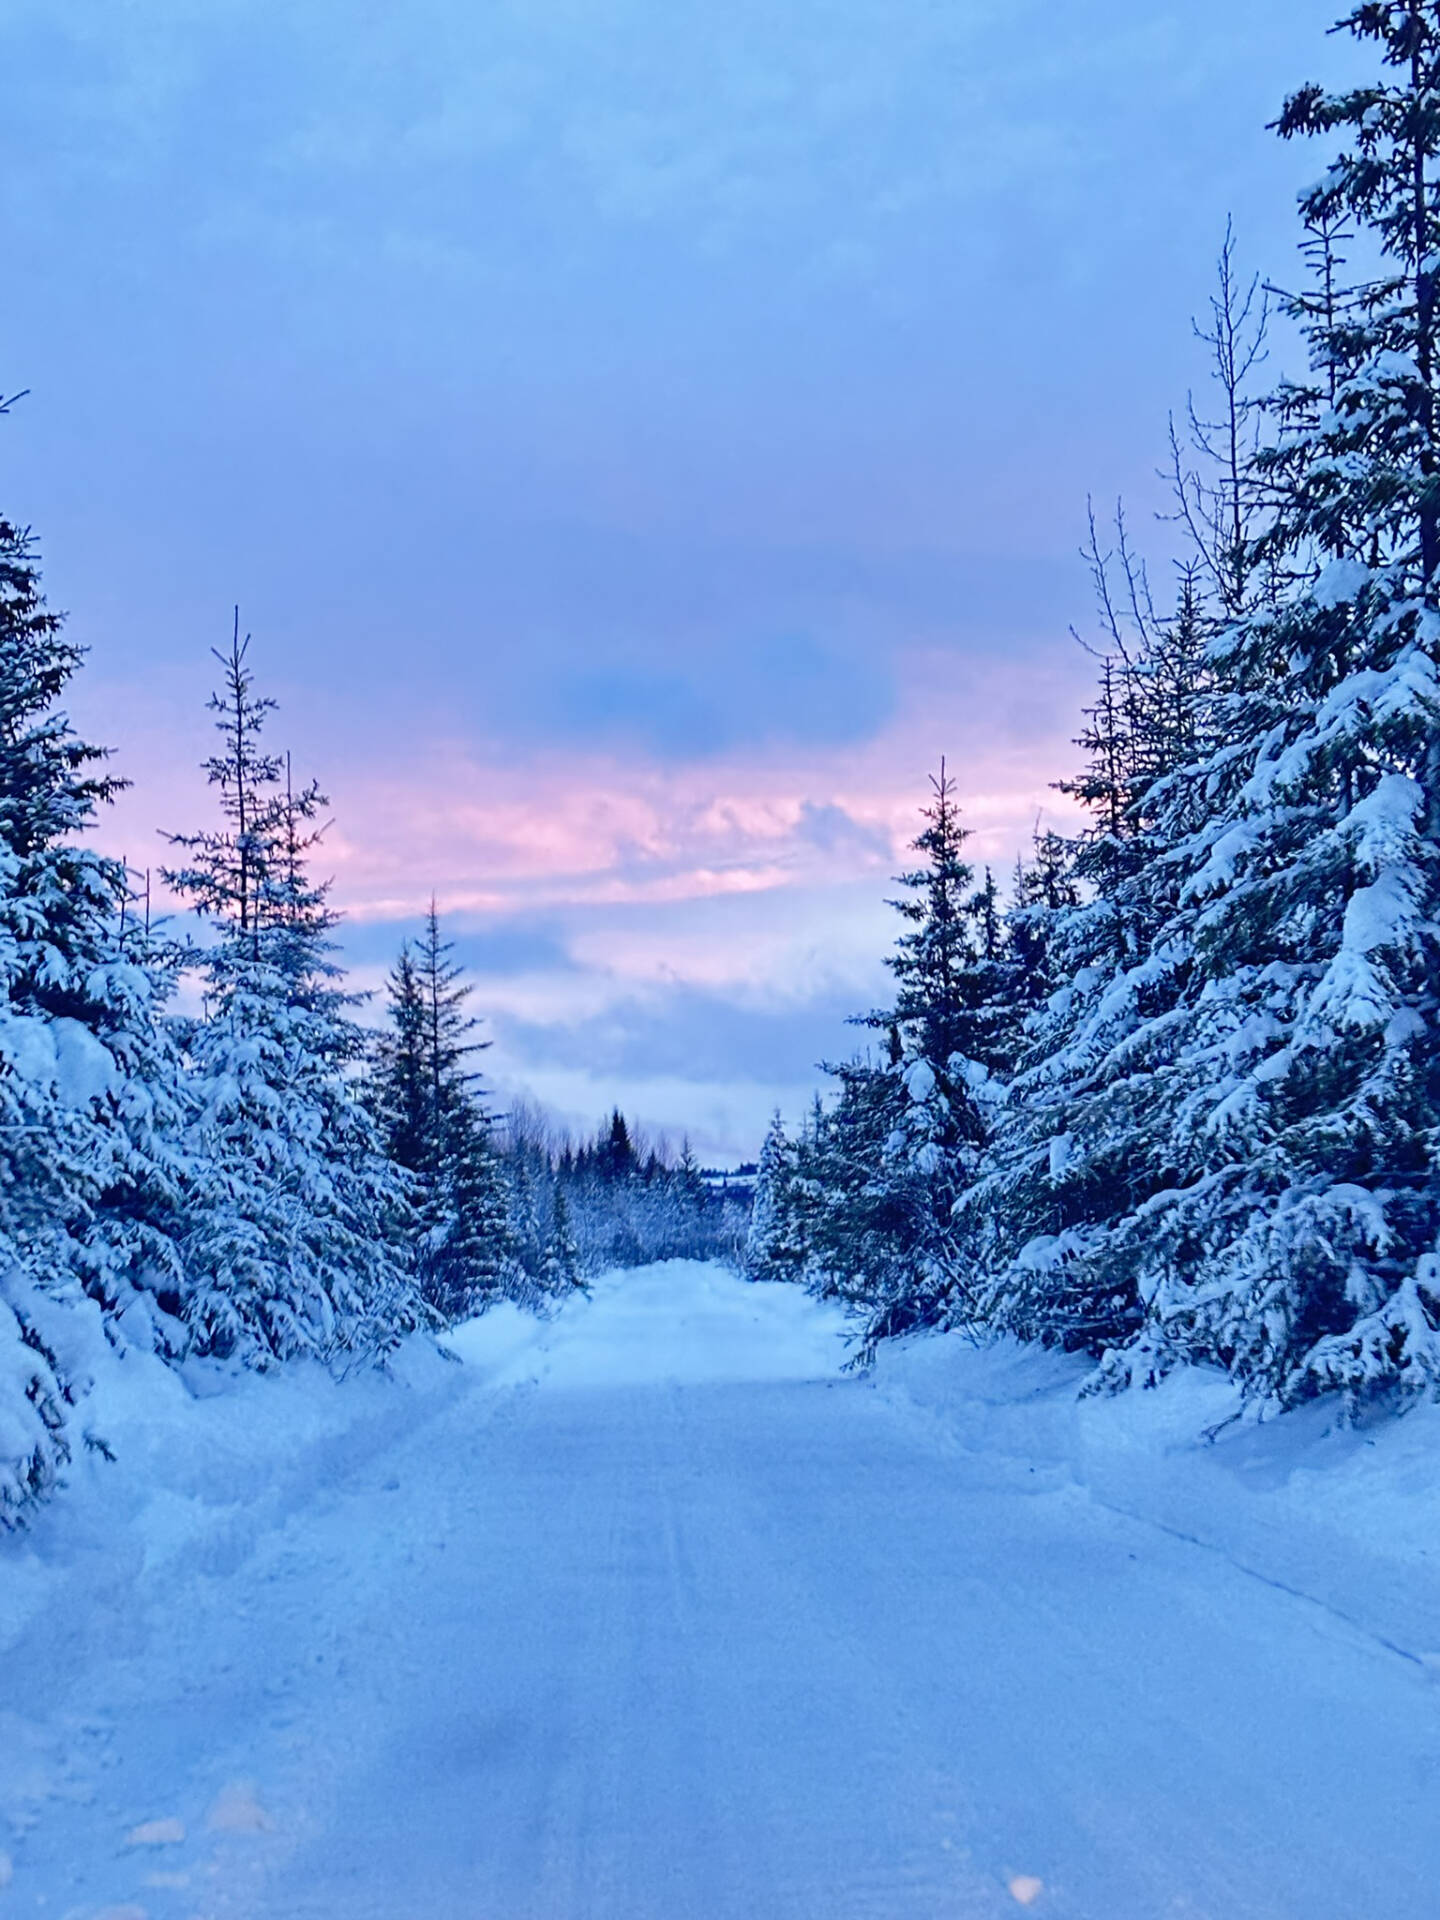 A winter sunset colors the sky at the end of a snow-lined road near Anchor Point, Alaska on Monday, Jan. 1, 2023. (Callie Steinberg/Homer News)